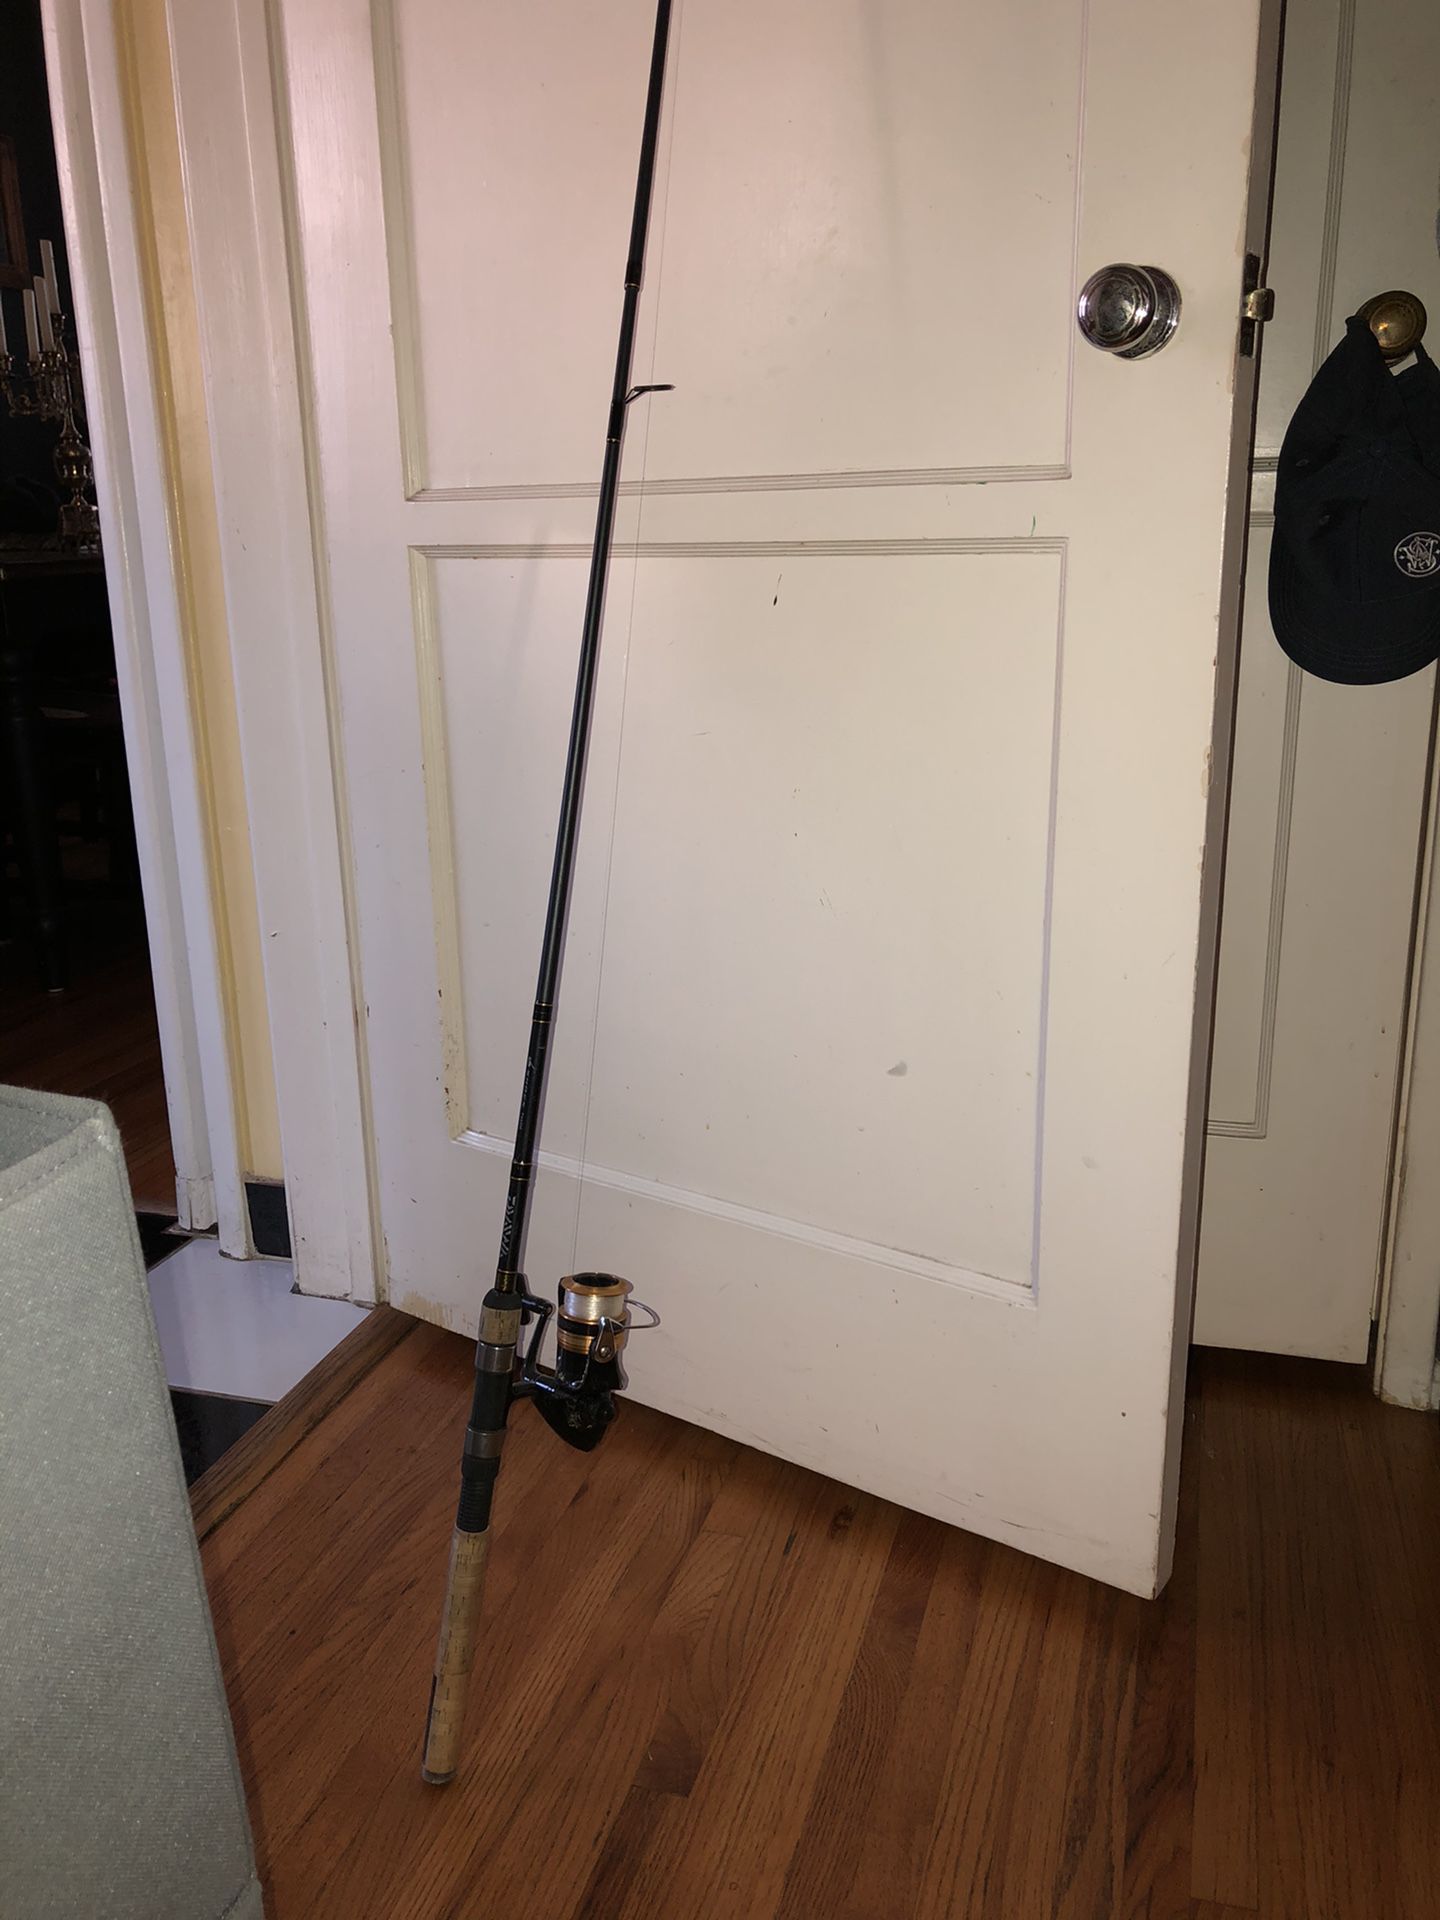 Fishing pole and reel